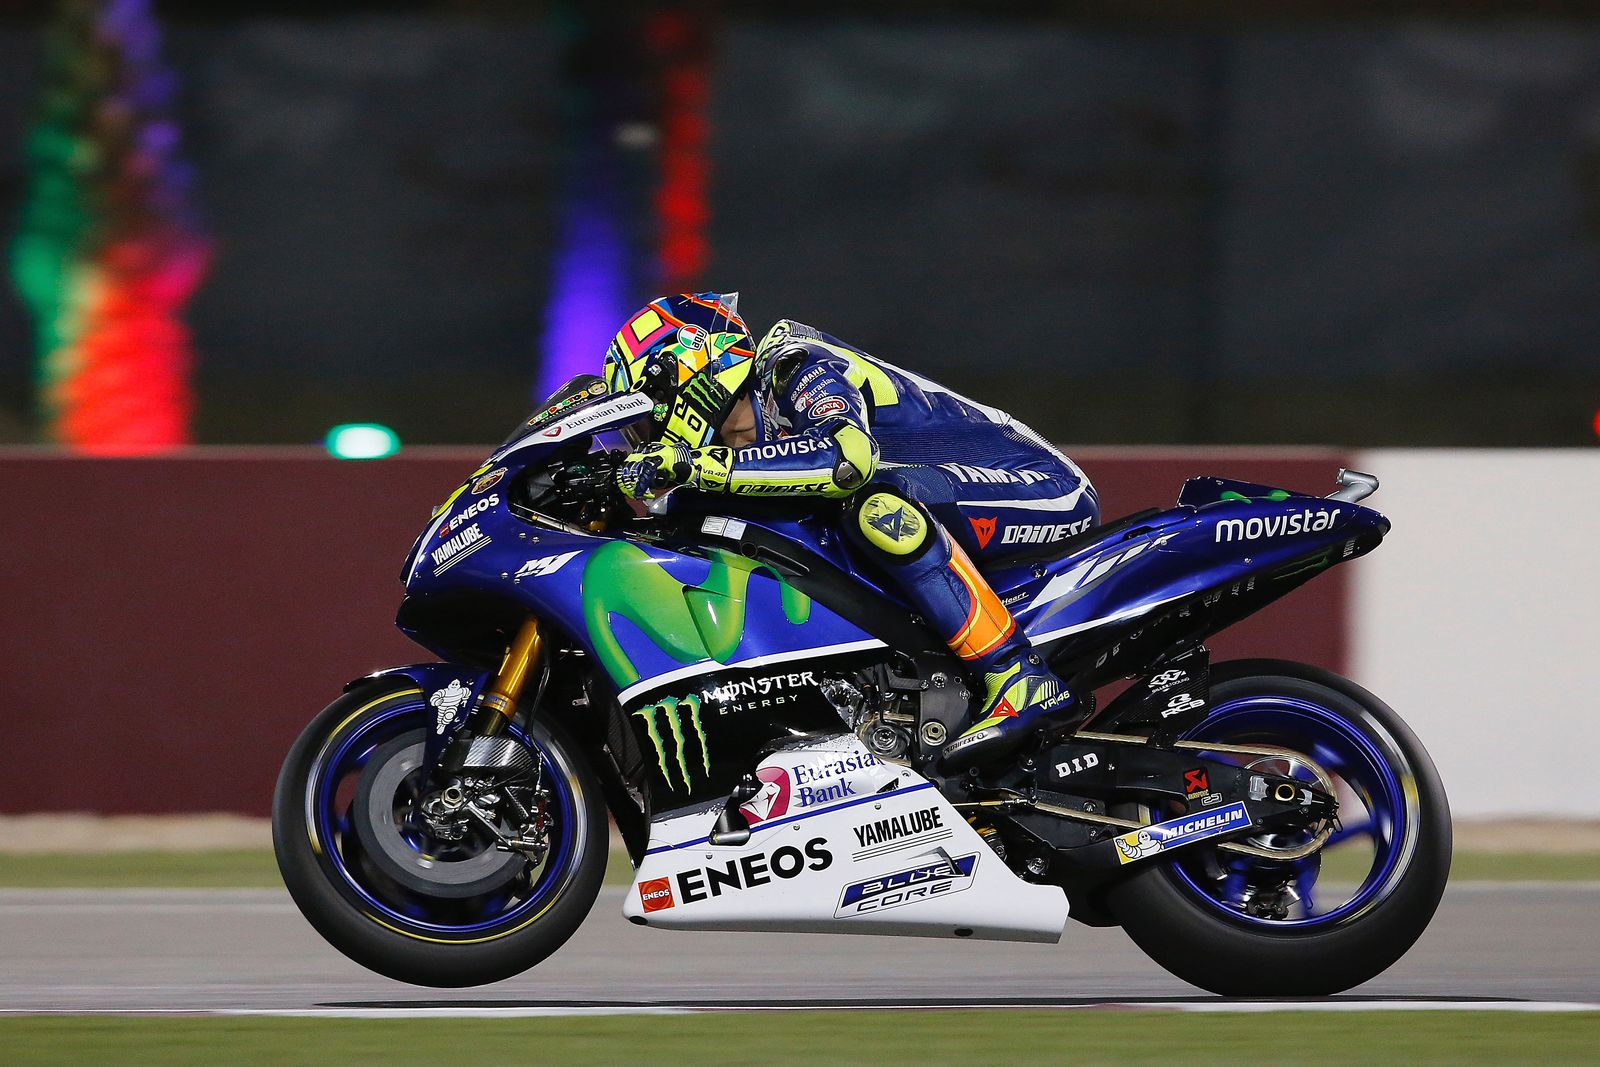 Valentino Rossi And Yamaha Announce New Two-Year Contract Extension - Roadracing World Magazine | Motorcycle Riding, Racing & Tech News